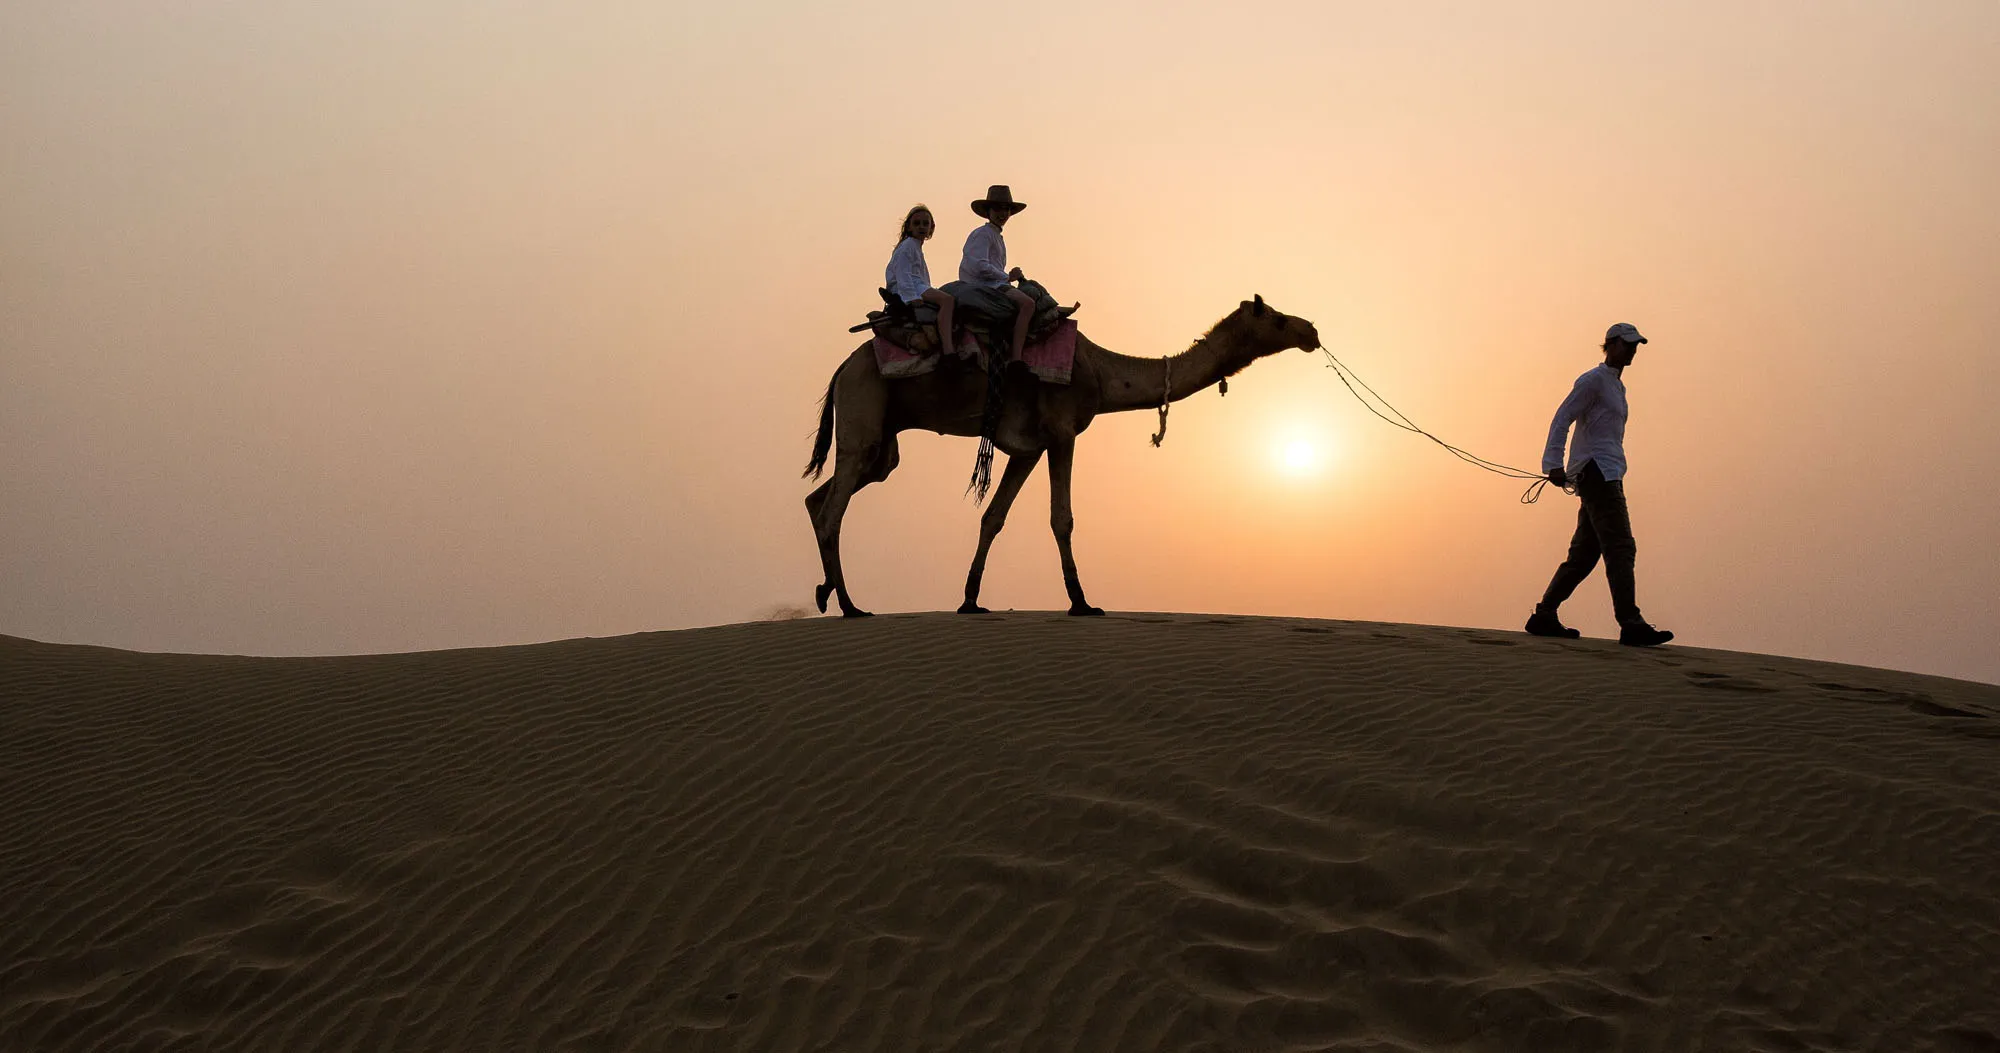 Featured image for “Going on Camel Safari In Jaisalmer, India”